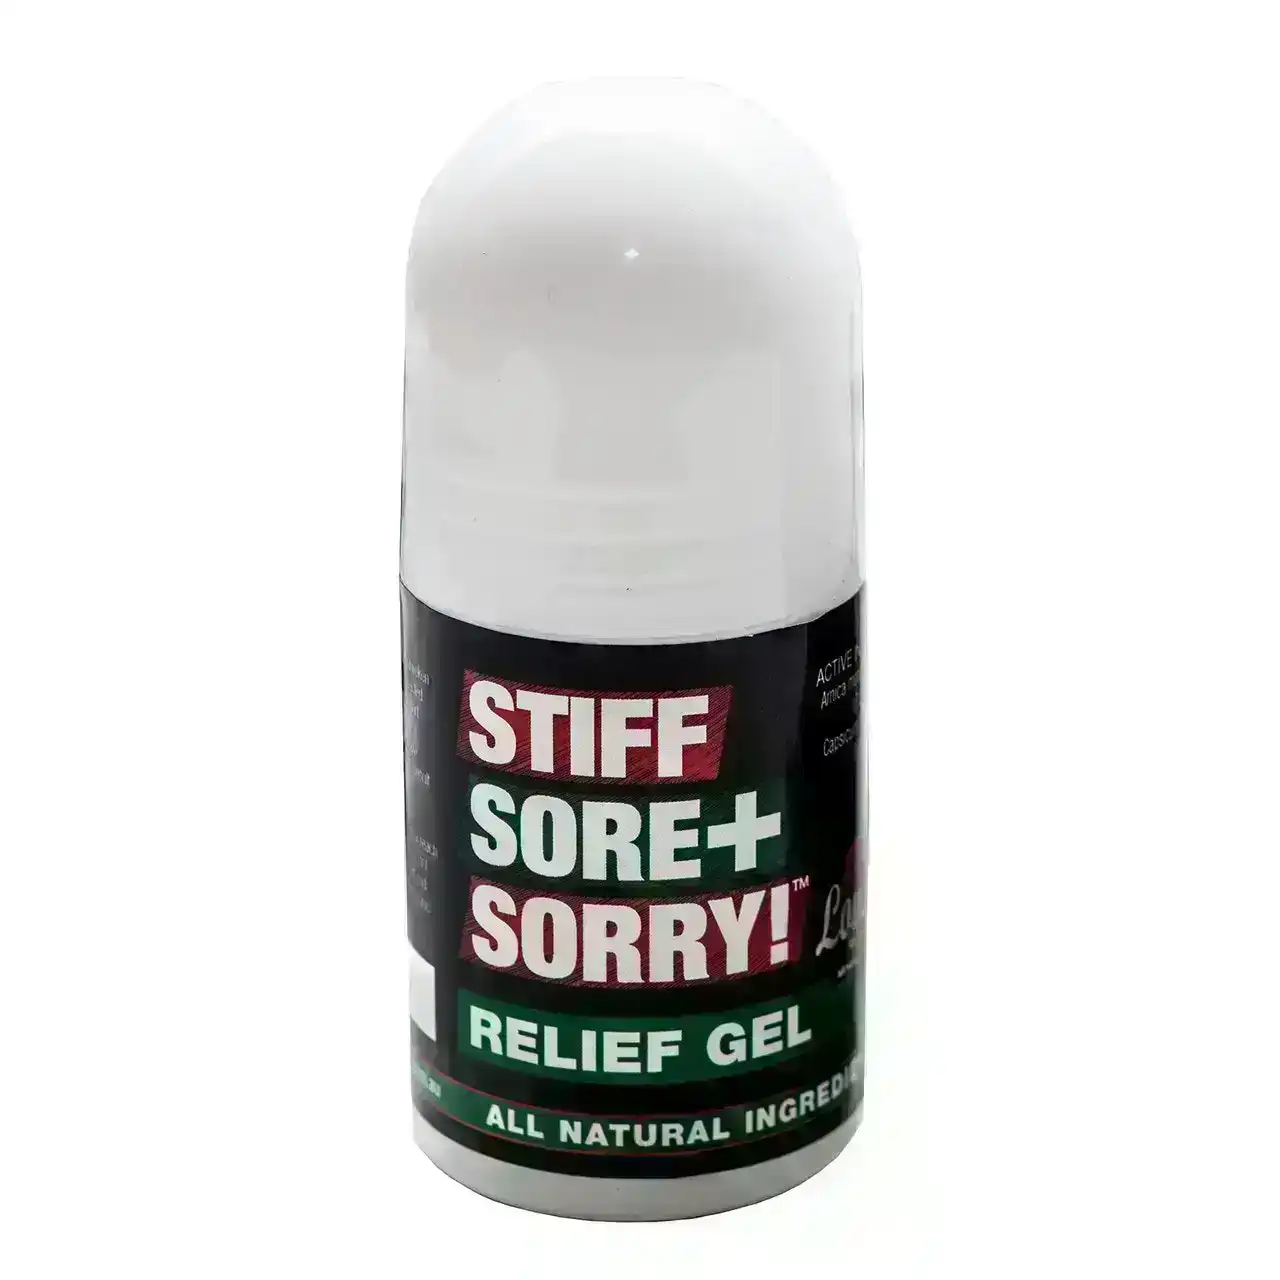 Stiff Sore + Sorry Pain Relief Gel Roll On 100ml